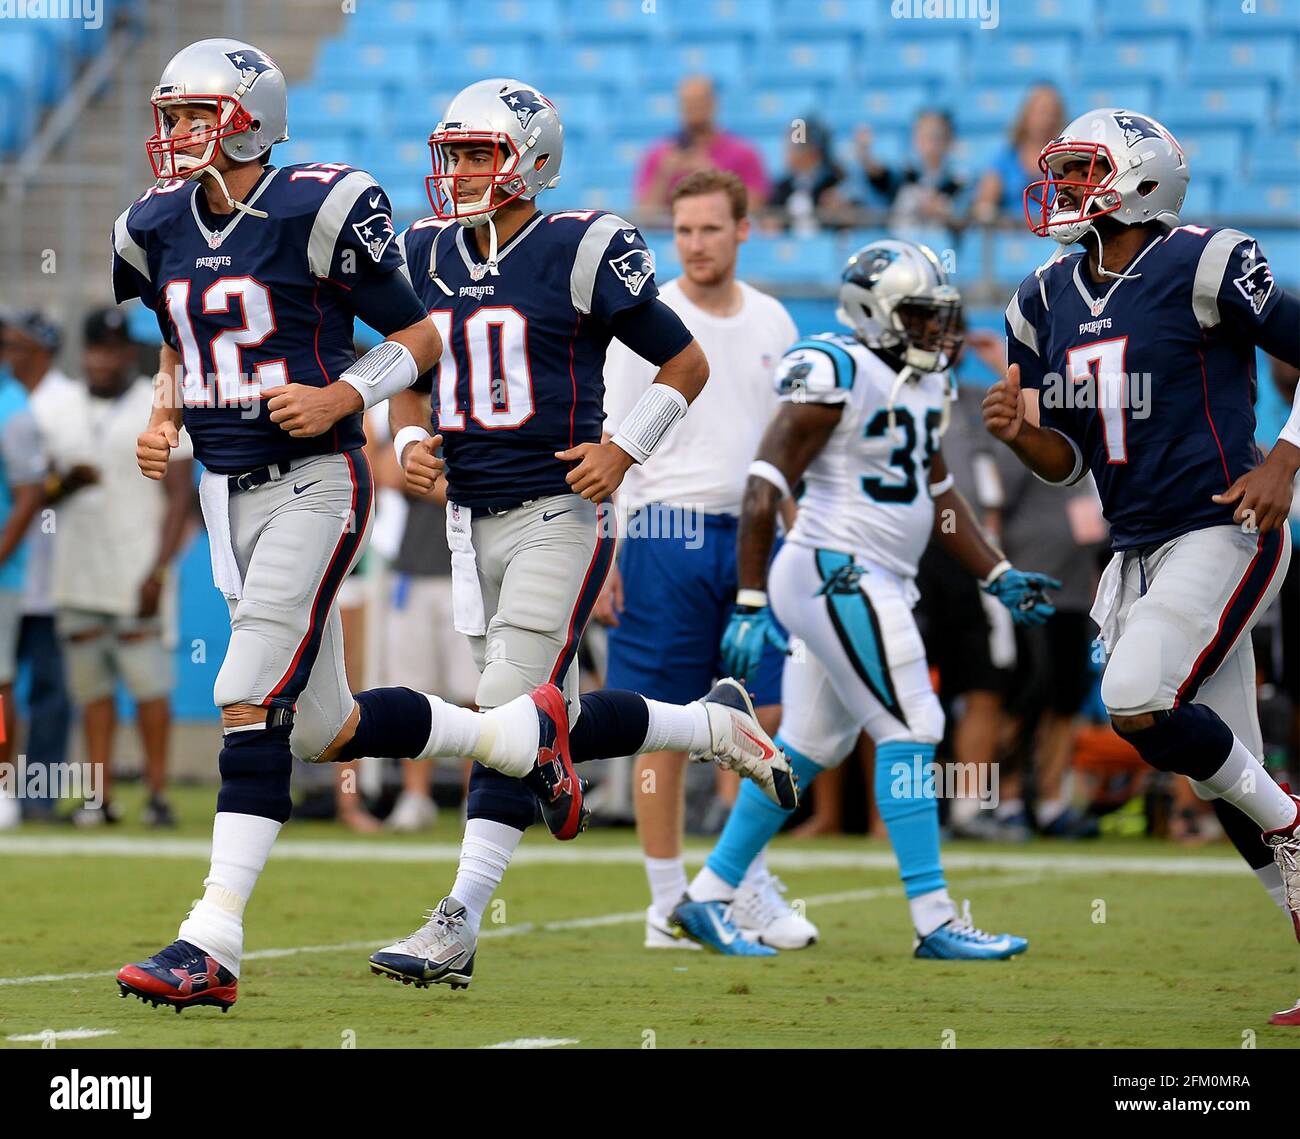 Charlotte, USA. 26th Aug, 2016. New England Patriots quarterback Tom Brady, left, leads quarterbacks Jimmy Garoppolo, center and Jacoby Brissett, right, onto the field at Bank of America Stadium for a pre-game warmup on Friday, August 26, 2016. (Photo by Jeff Siner/The Charlotte Observer/TNS/Sipa USA) Credit: Sipa USA/Alamy Live News Stock Photo